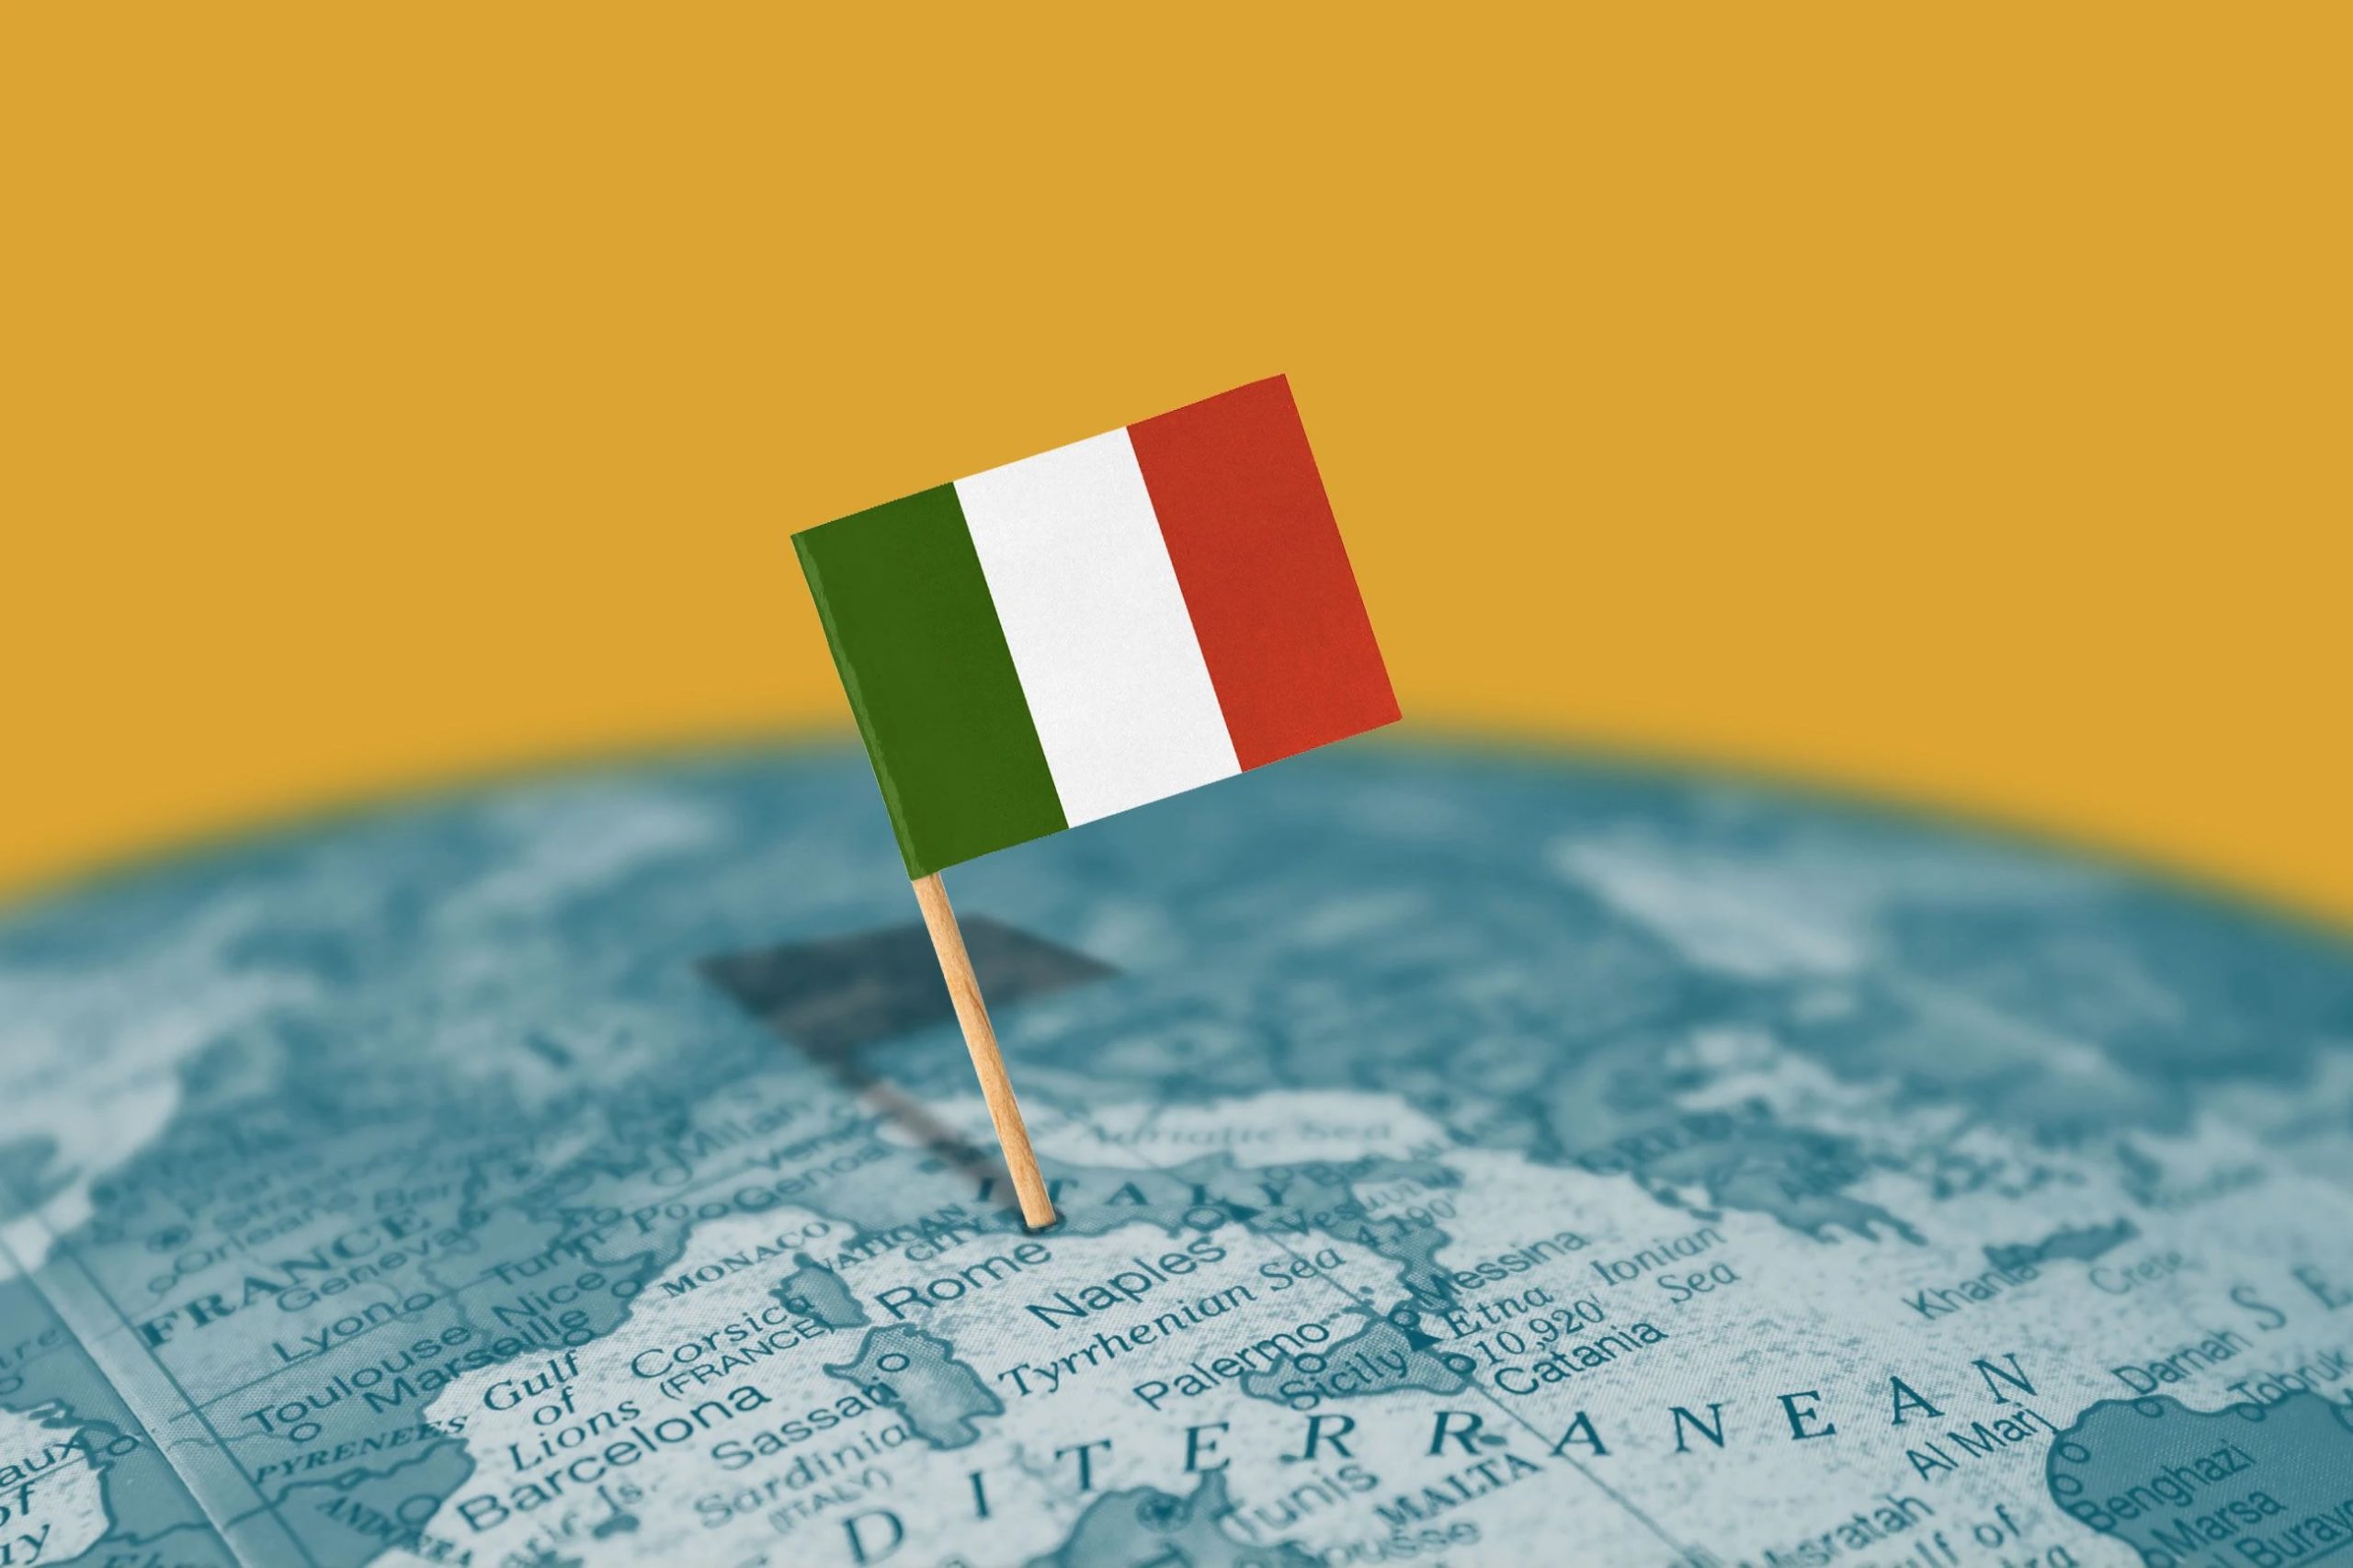 Italy will only require the vaccination certificate or cure of the disease within the last 180 days. For those who are not fully vaccinated or did not get COVID in the last few months, a negative test will be required, done within 72 hours before departure. A negative test will not be necessary for travelers vaccinated with the accepted doses or cured of COVID.